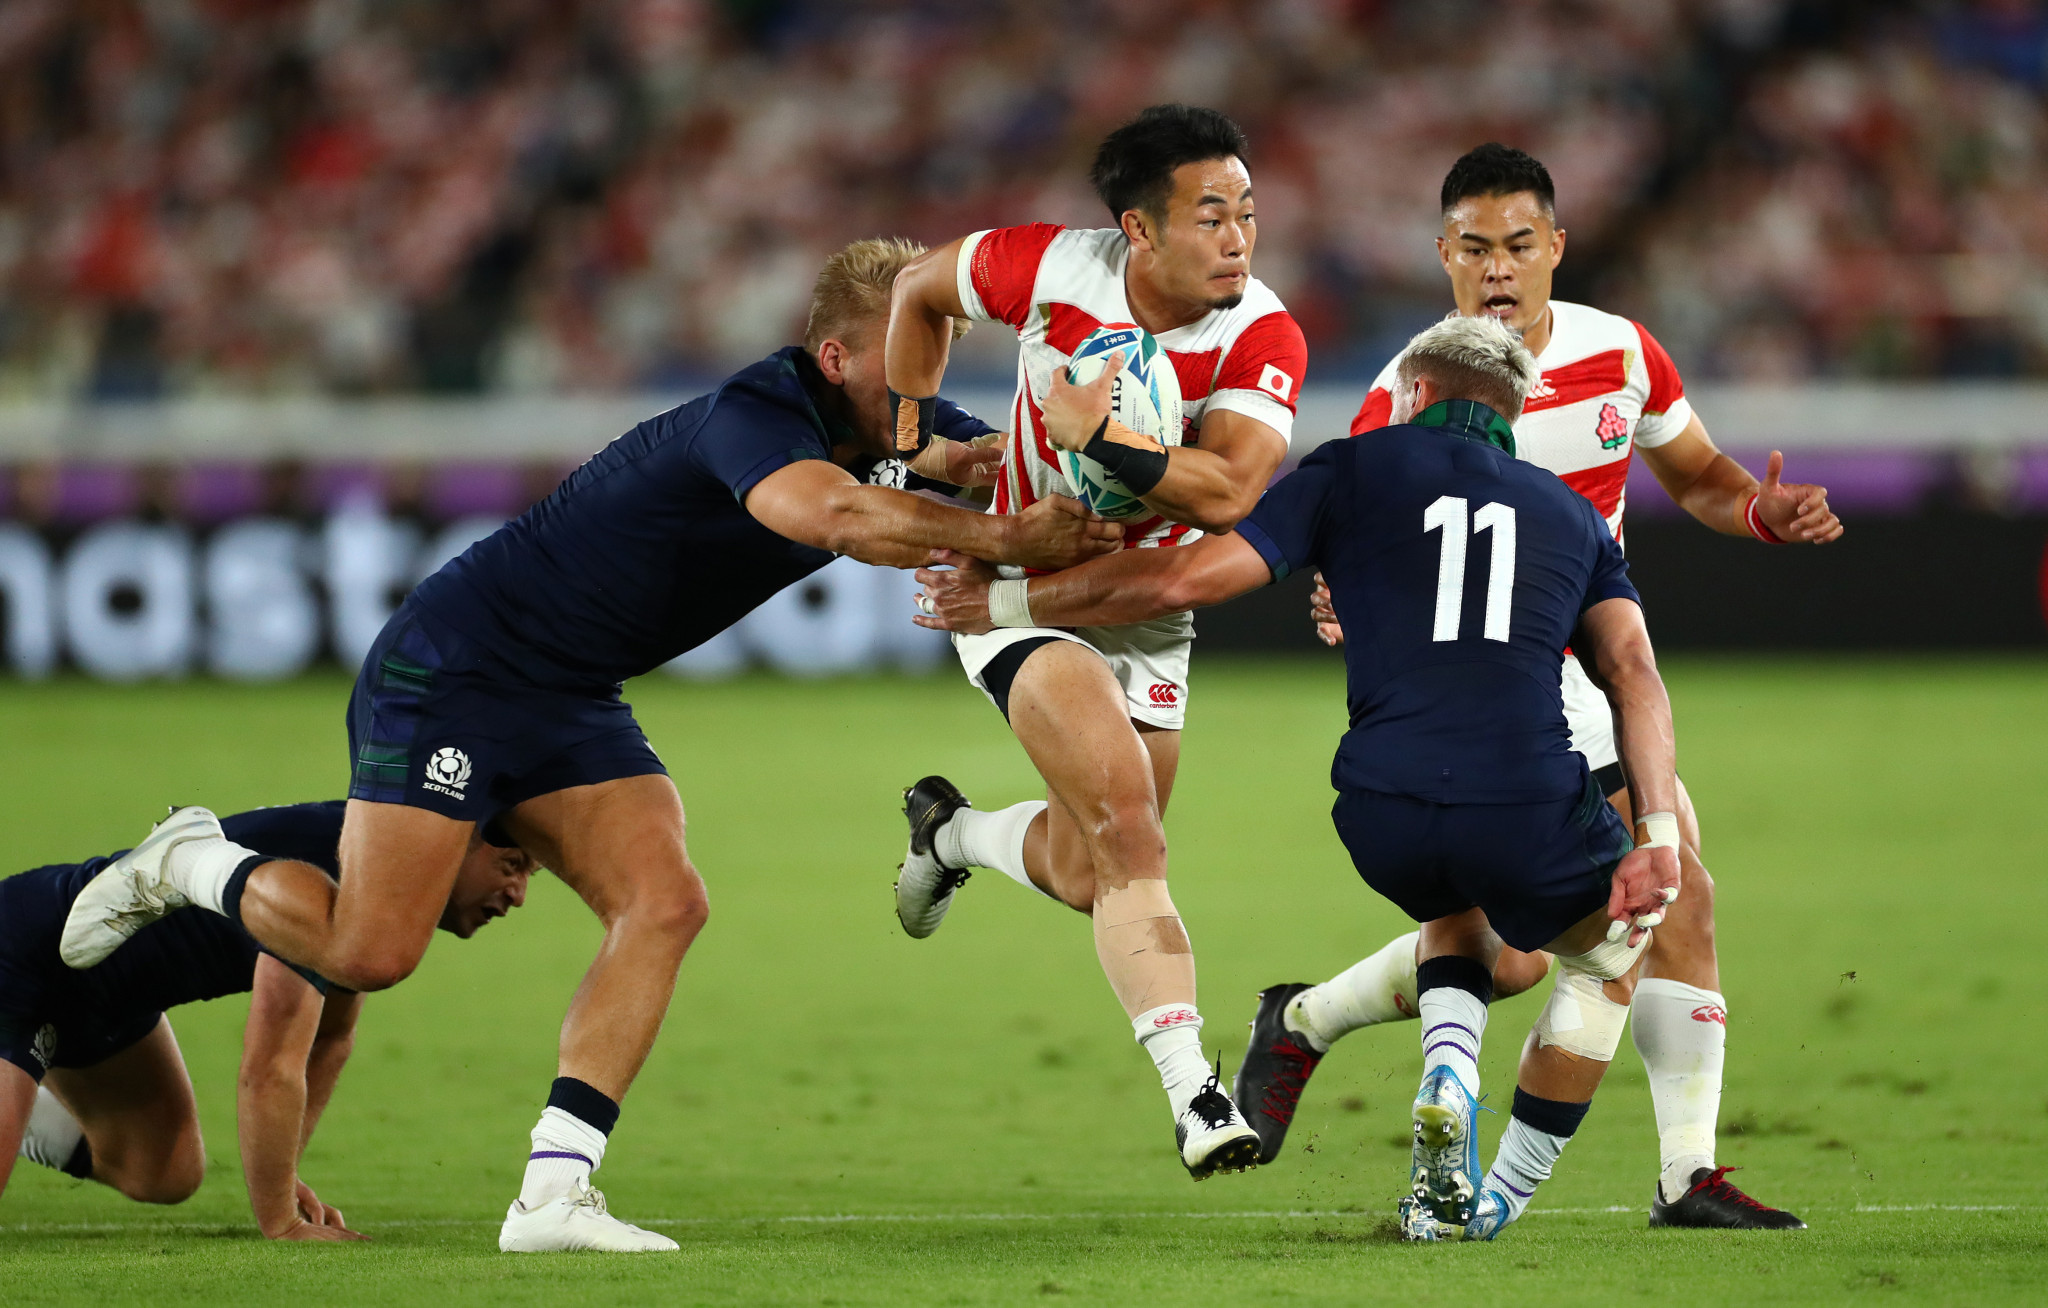 Broadcast records announced for 2019 Rugby World Cup